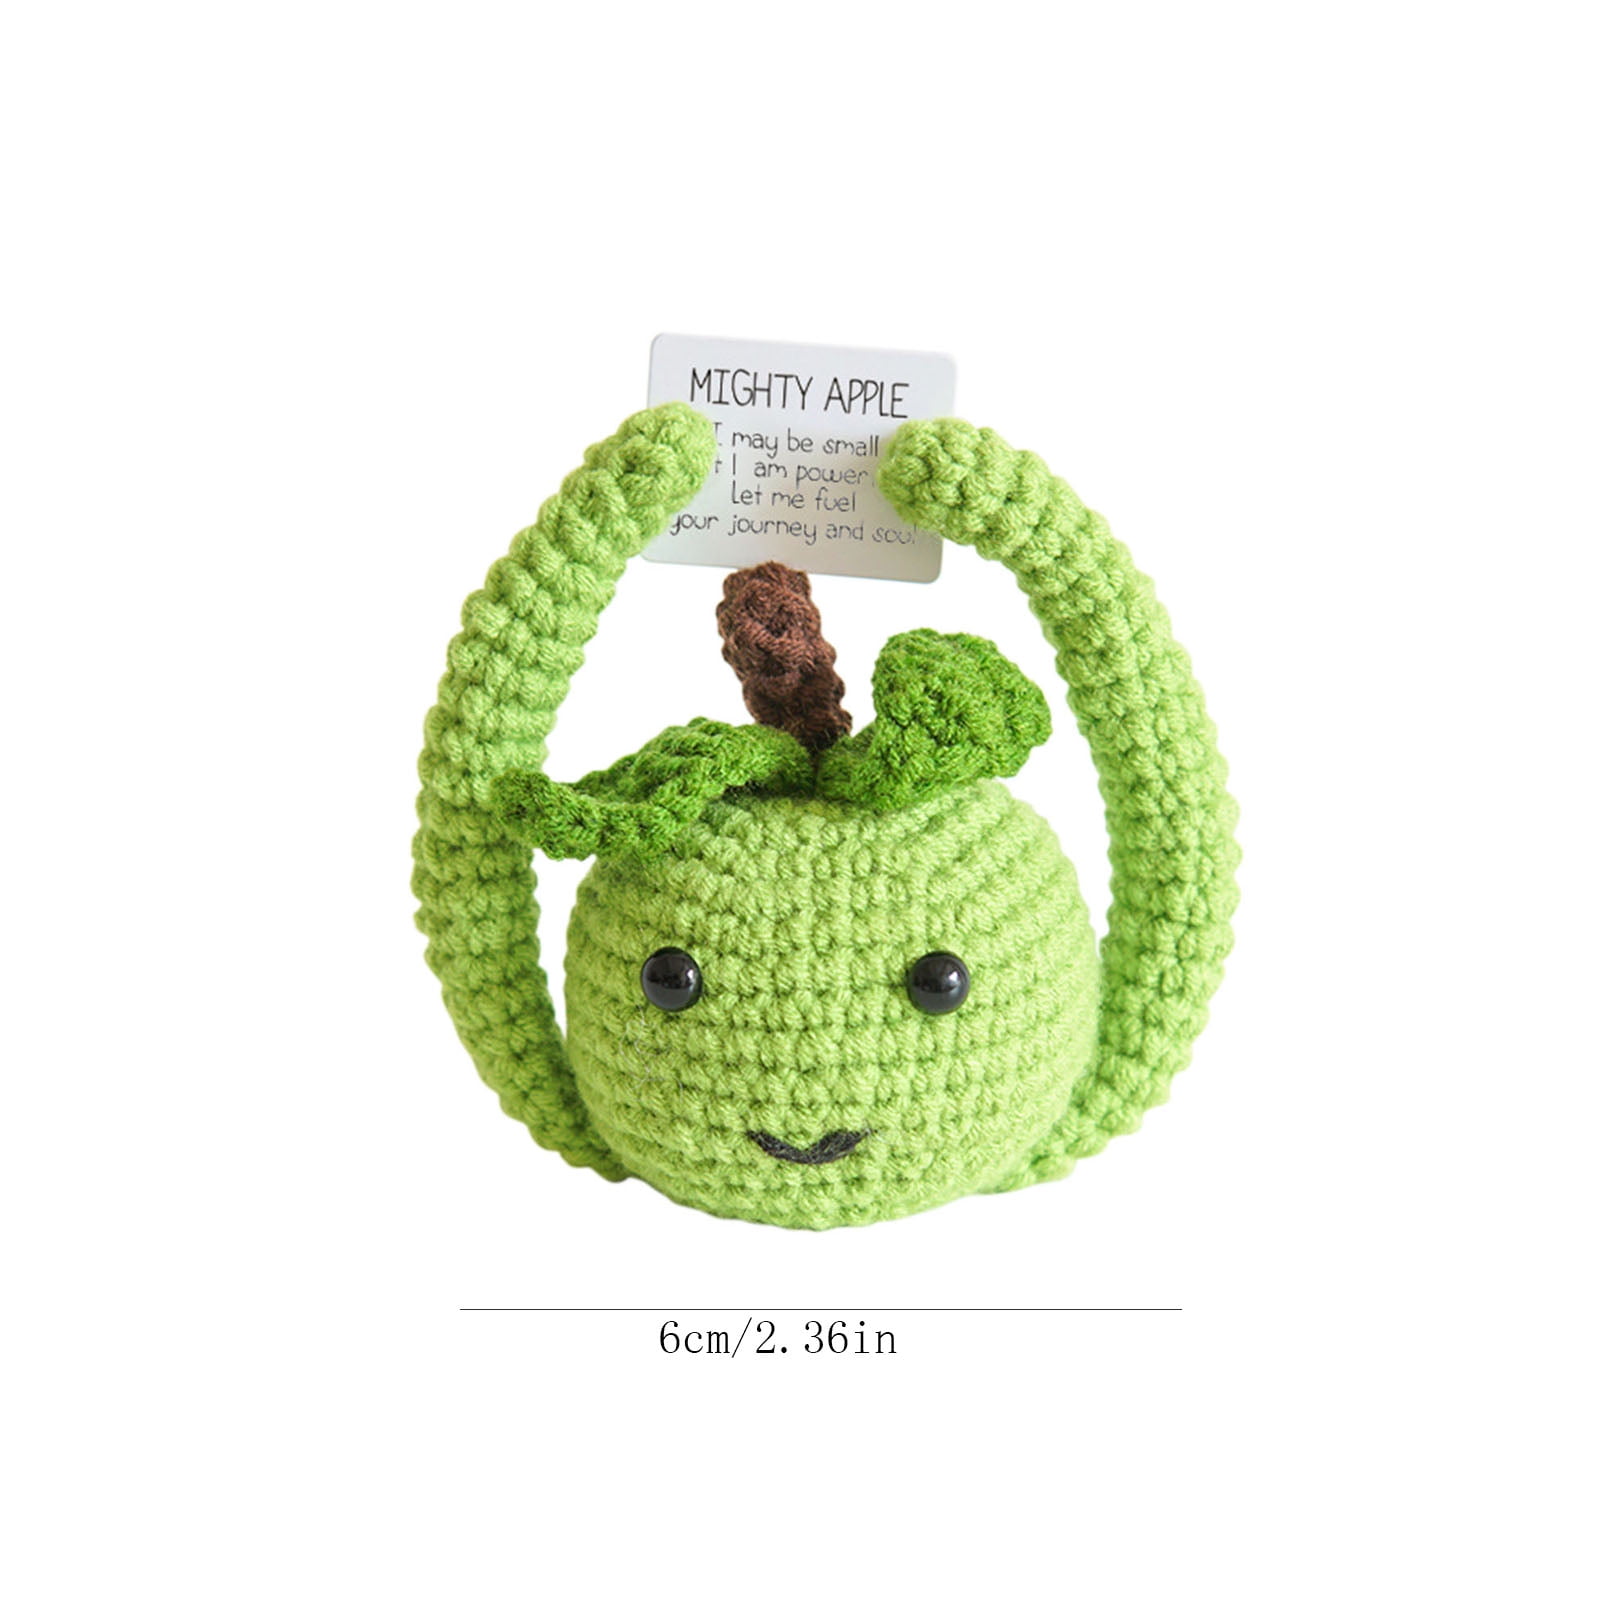 ONE Emotional Support Pickle Keychain Crochet Pickle - My Community Made